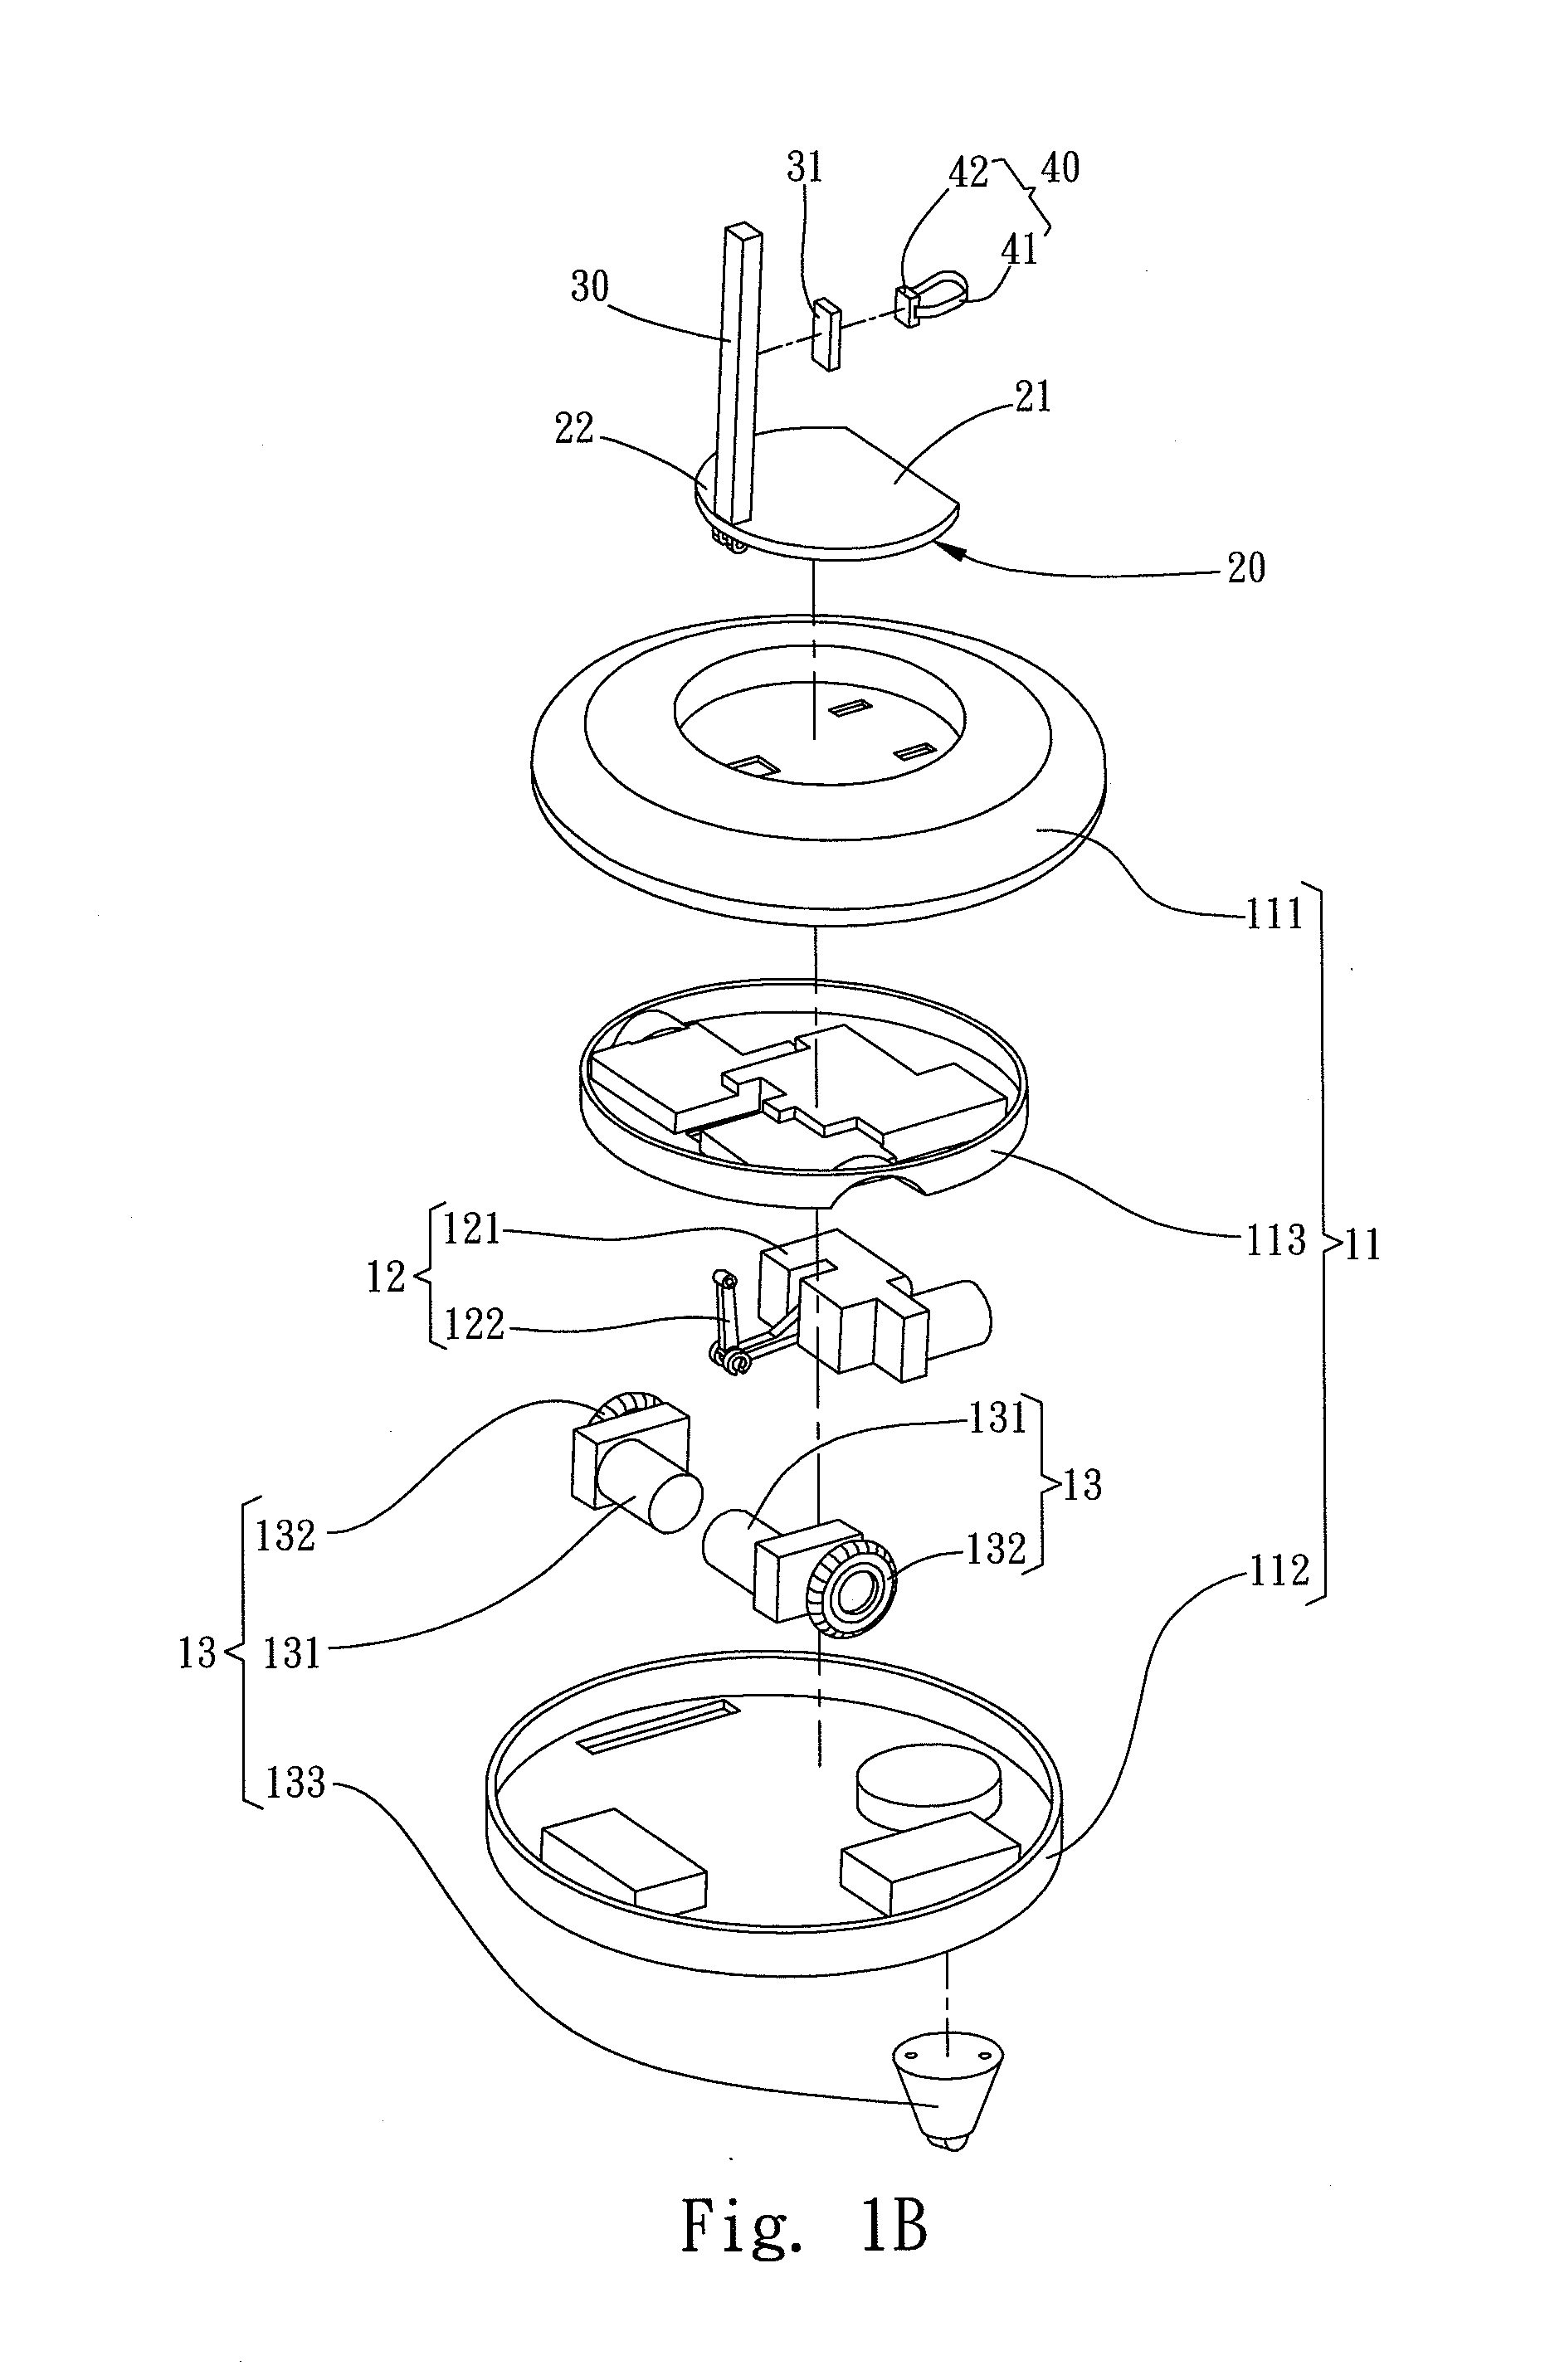 Toy carrying mechanism